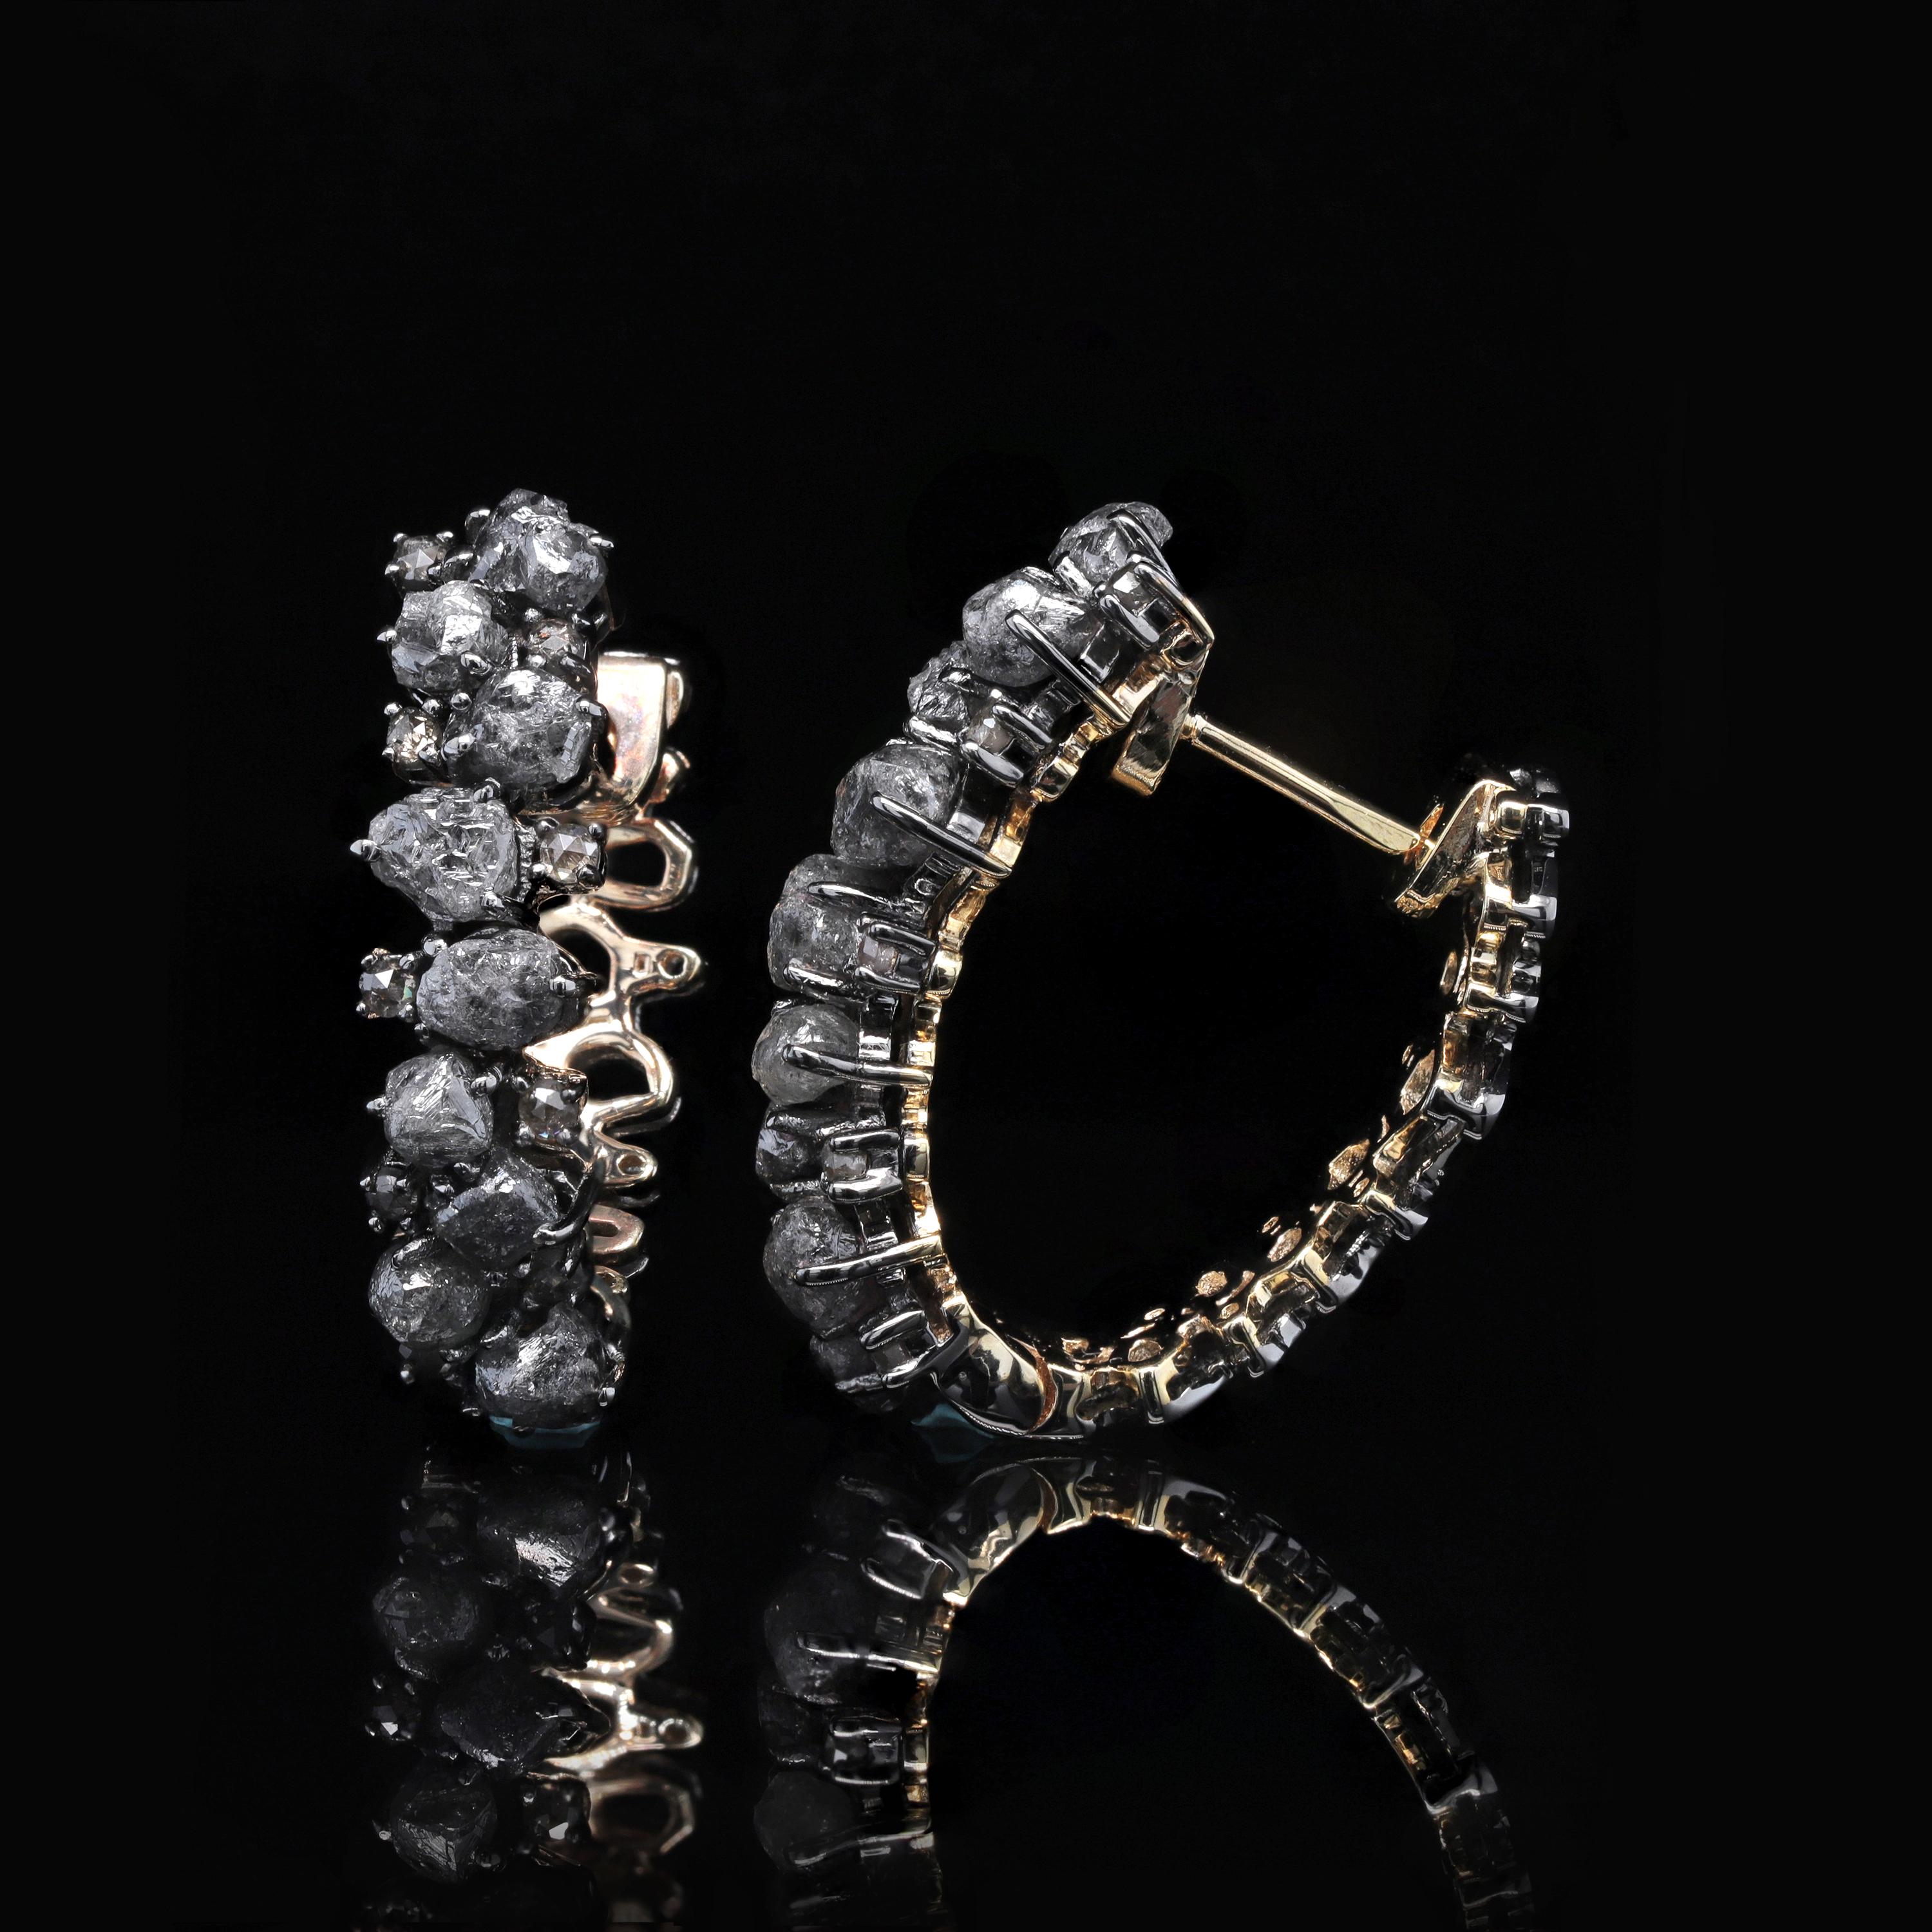 Modern Adeitiy Recycled Silver Earrings with Brown Rose-Cut and Mined Diamonds